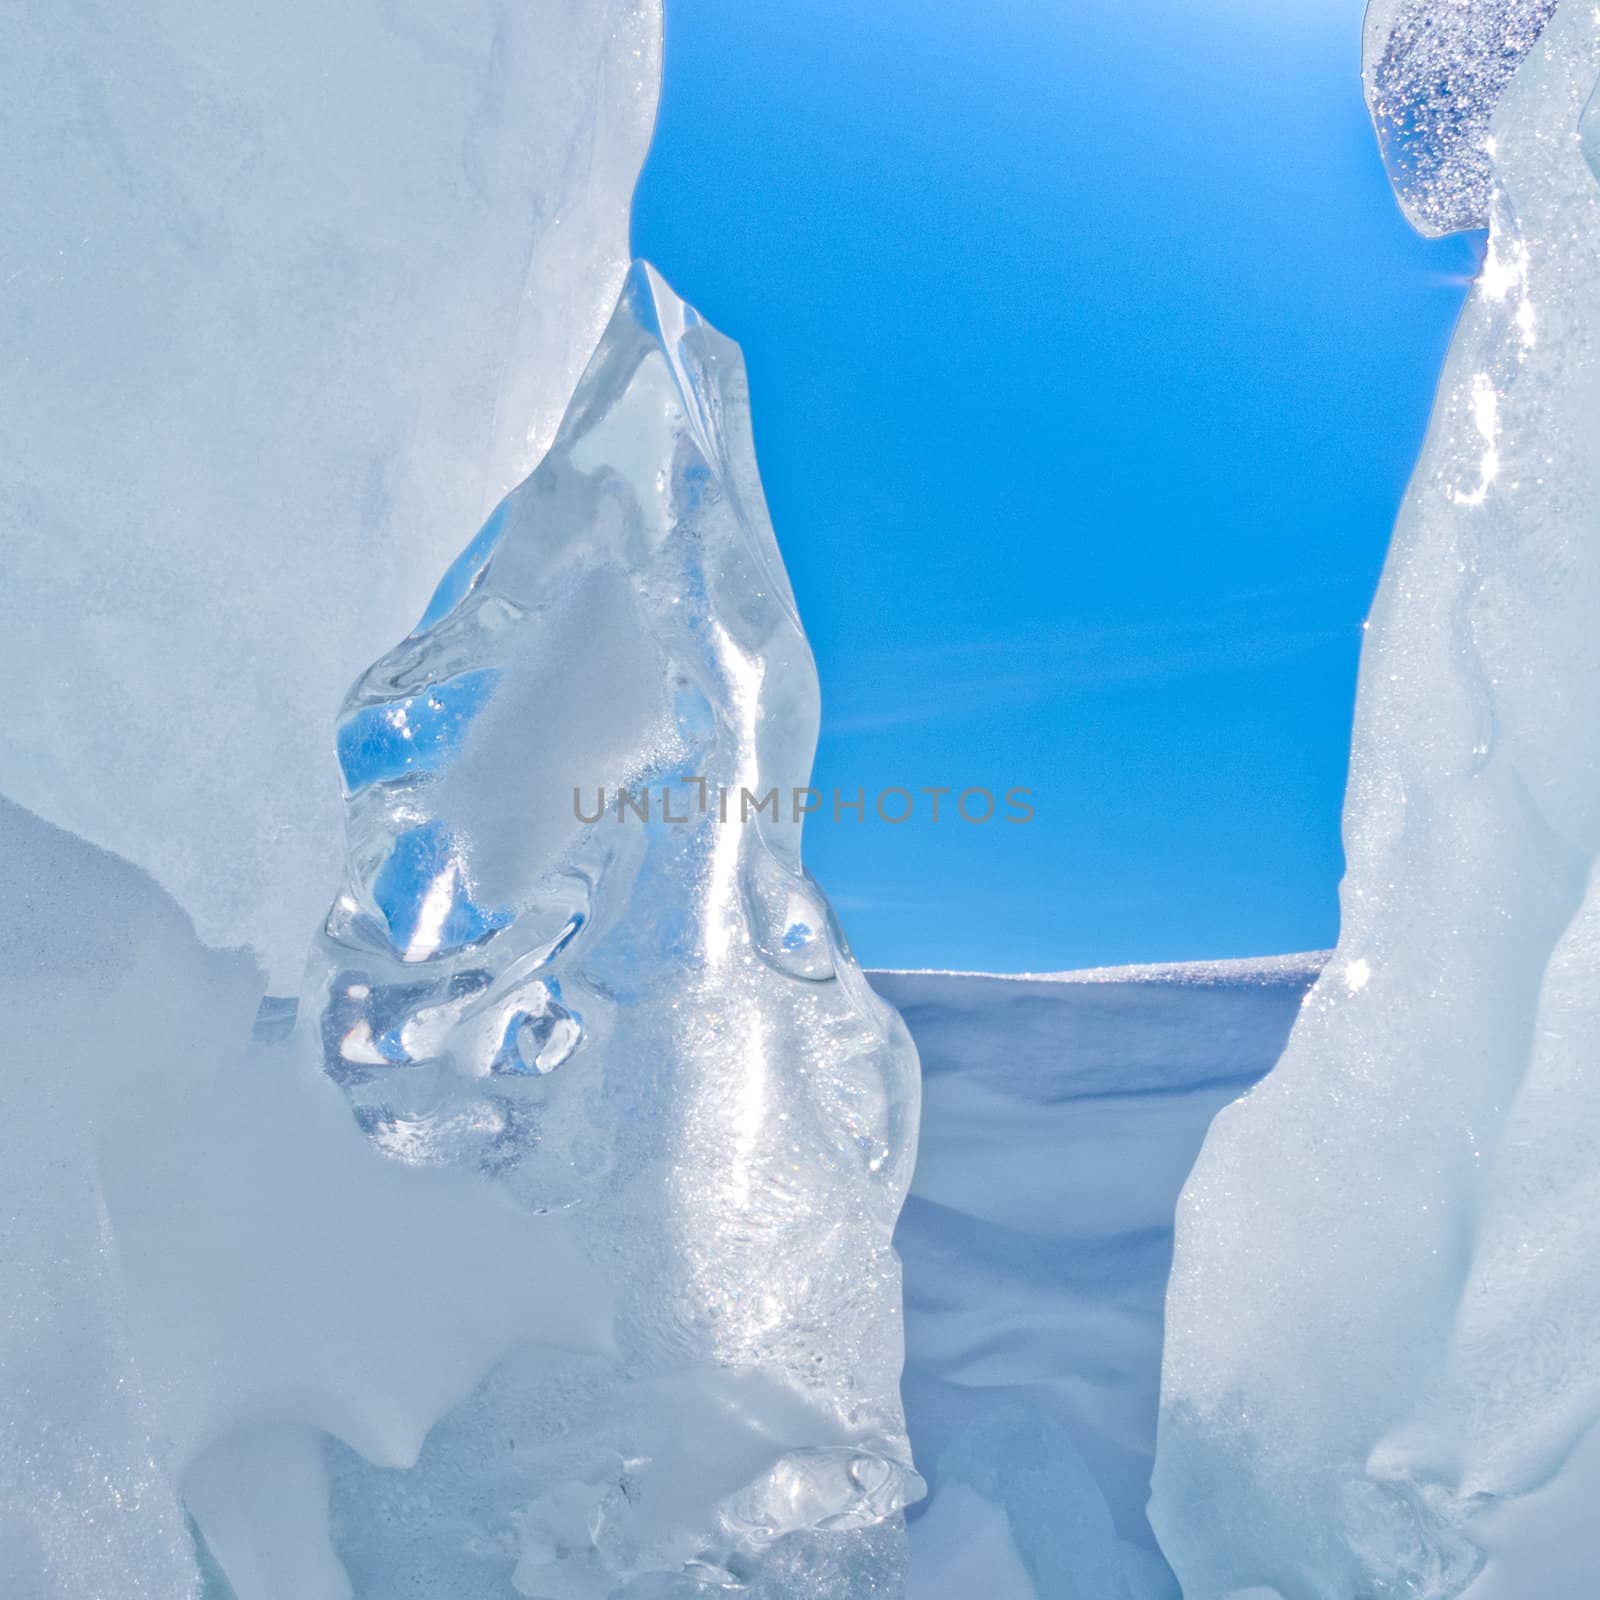 Narrow icy crevasse of glacier with some fresh snow and blue sunny sky visible in the opening